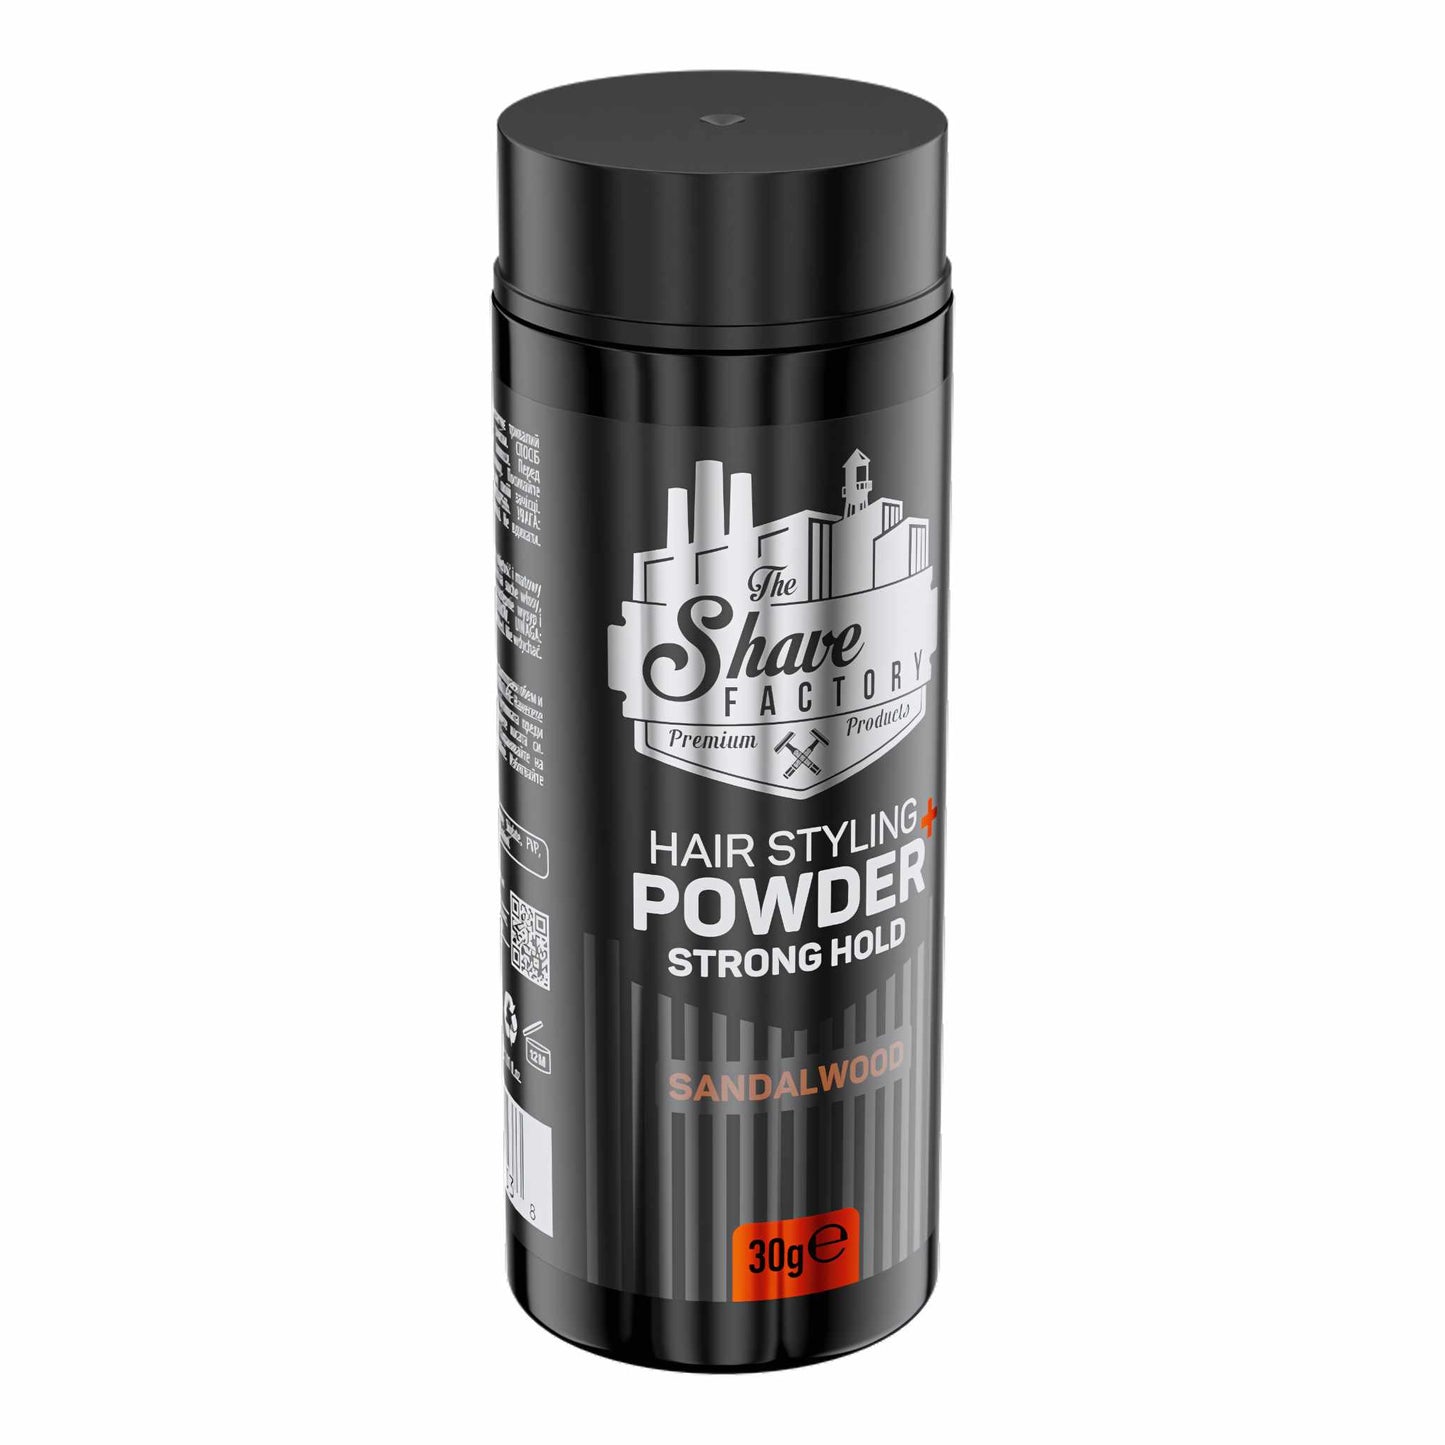 The Shave Factory Styling Powder Strong Hold Sandalwood 30 grams